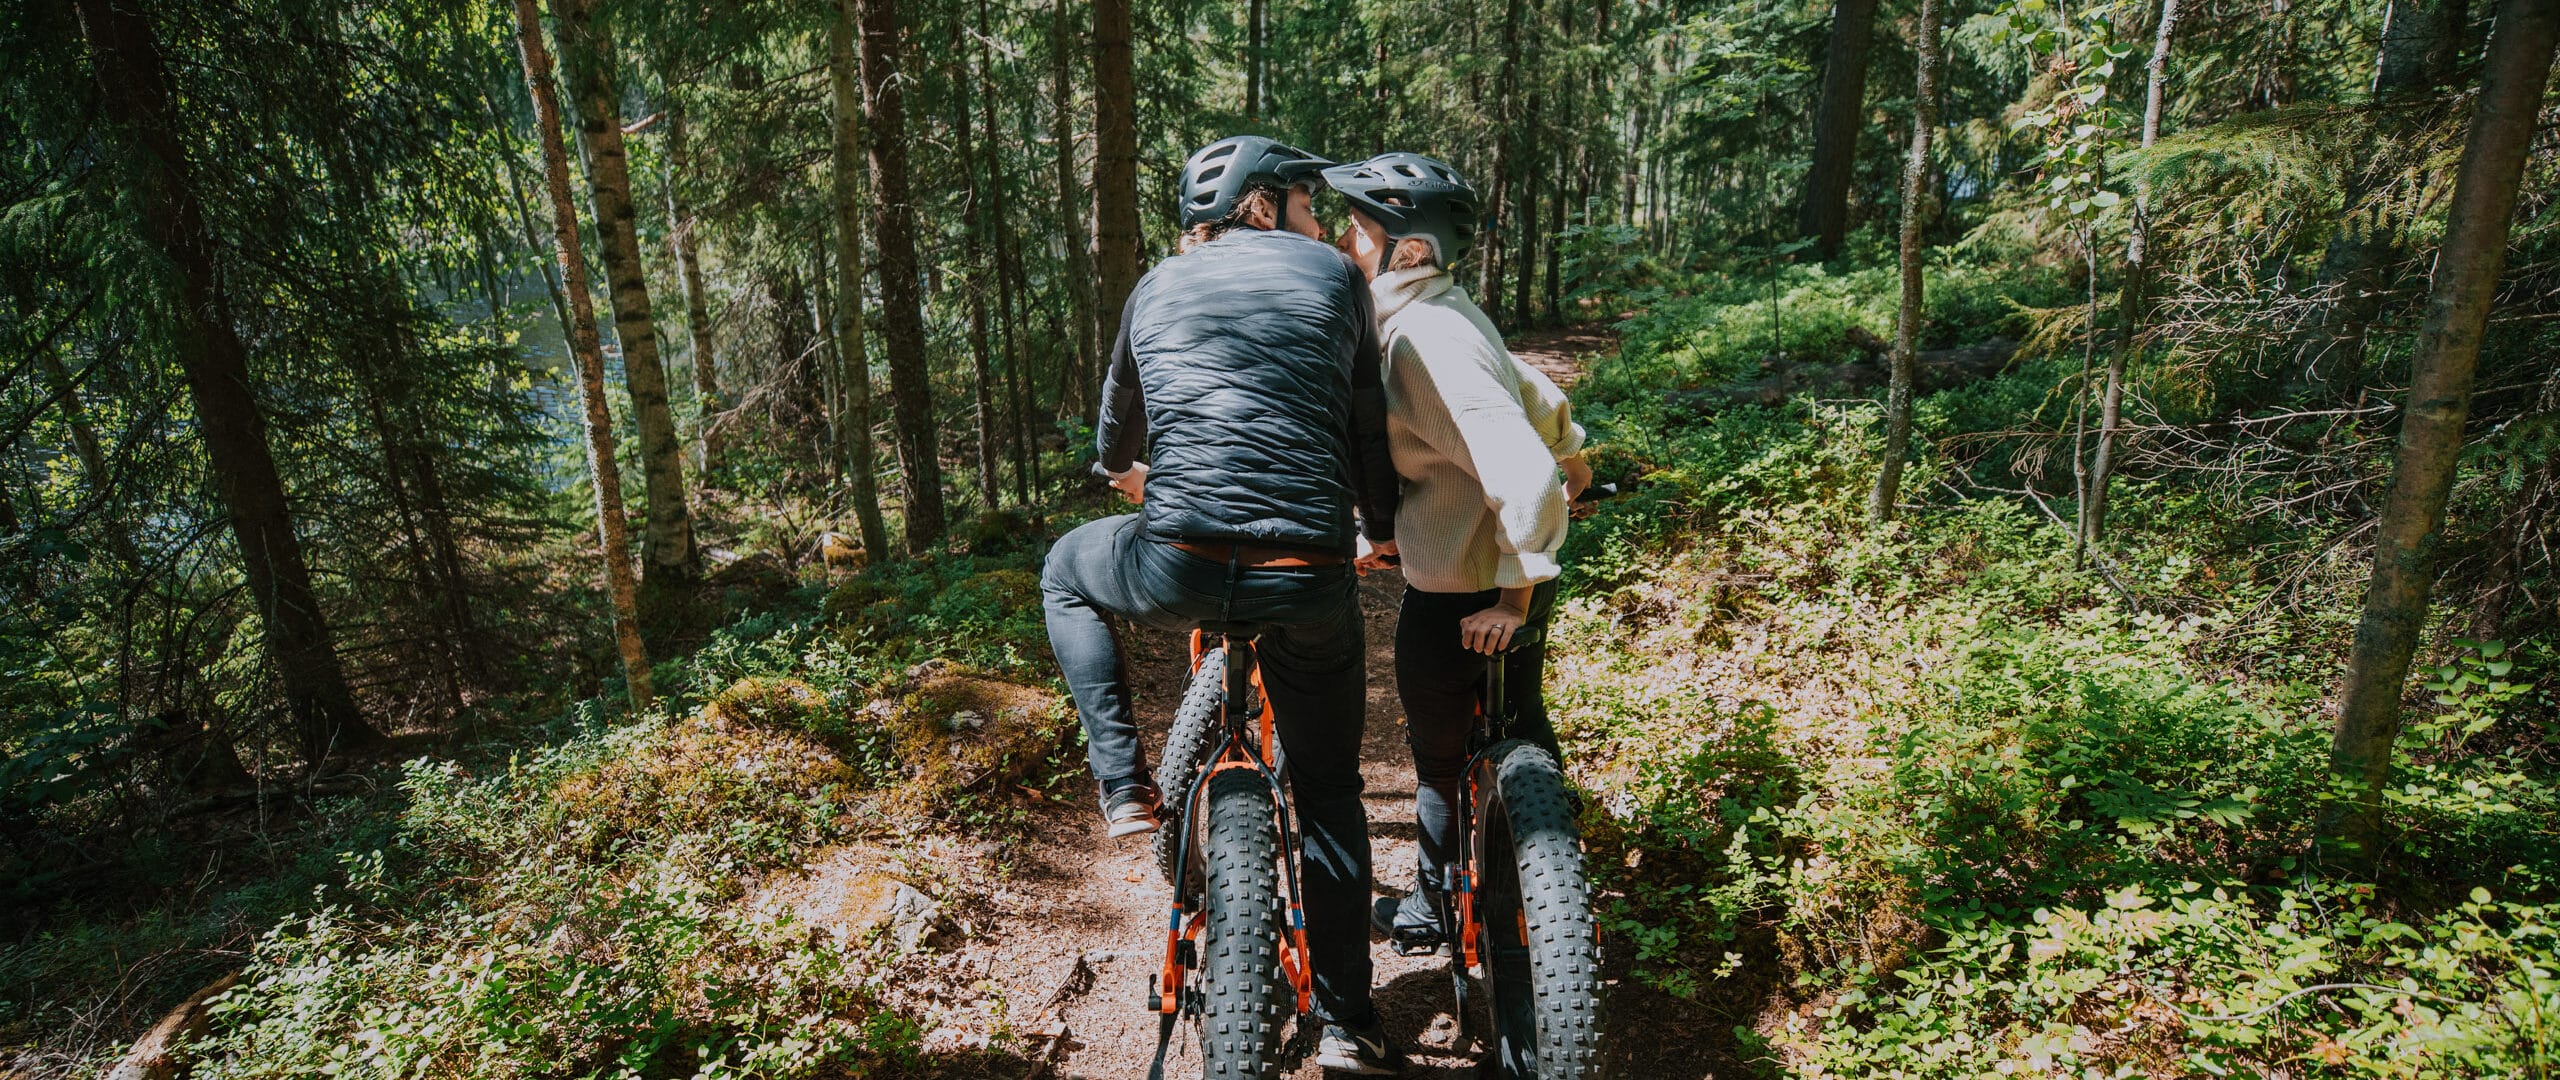 Two persons in a forest, kissing while on fatbikes.